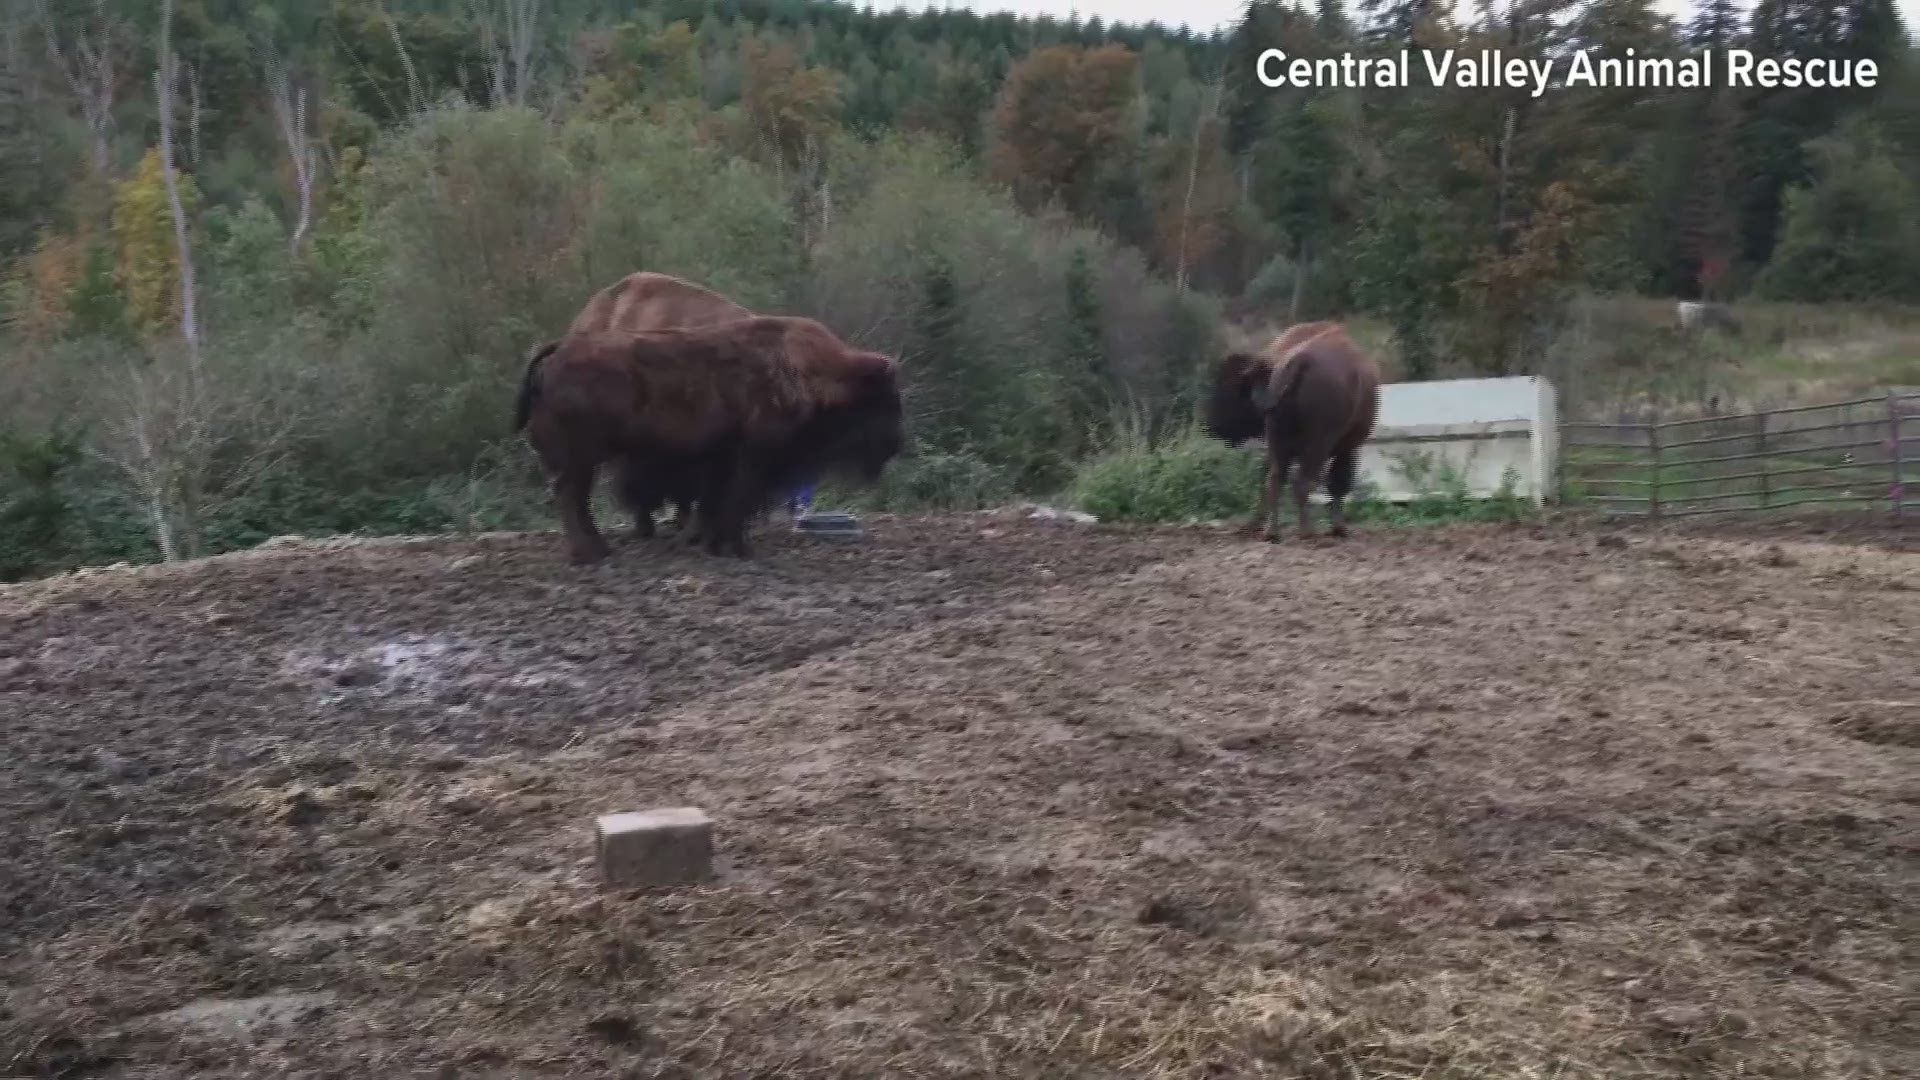 Workers with Central Valley Animal Rescue in Quilcene, Wash. corral bison onto a trailer. The bison were seized in an animal cruelty case and nursed back to health.